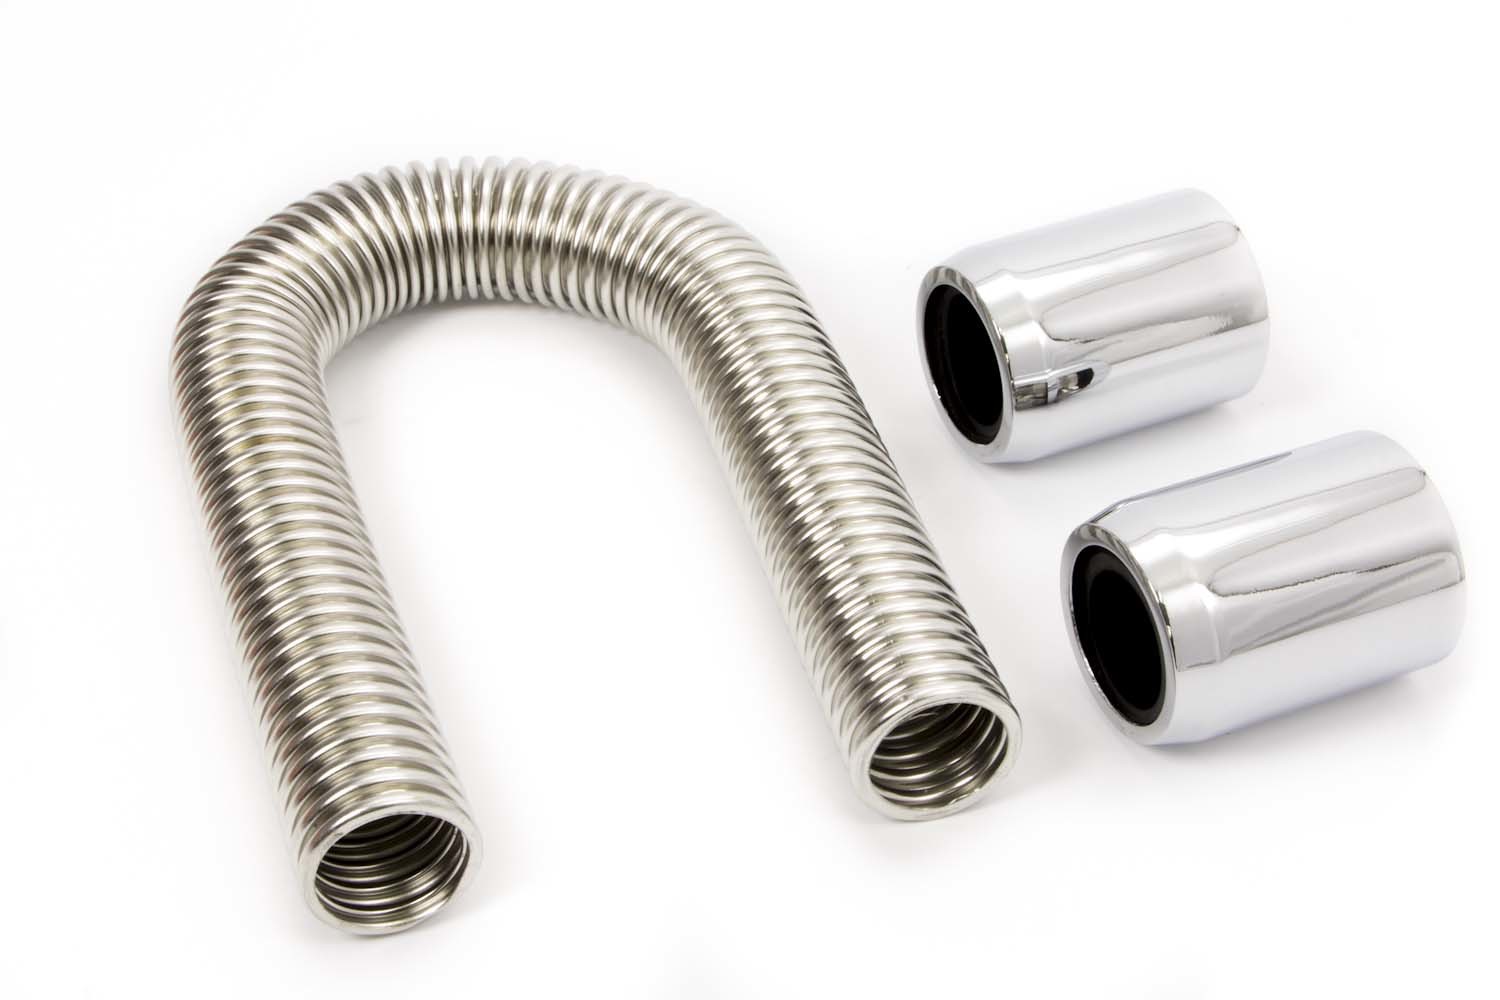 Racing Power Company R7302 Radiator Hose Kit, 12 in Long, Chrome End Caps, Stainless, Polished, Kit